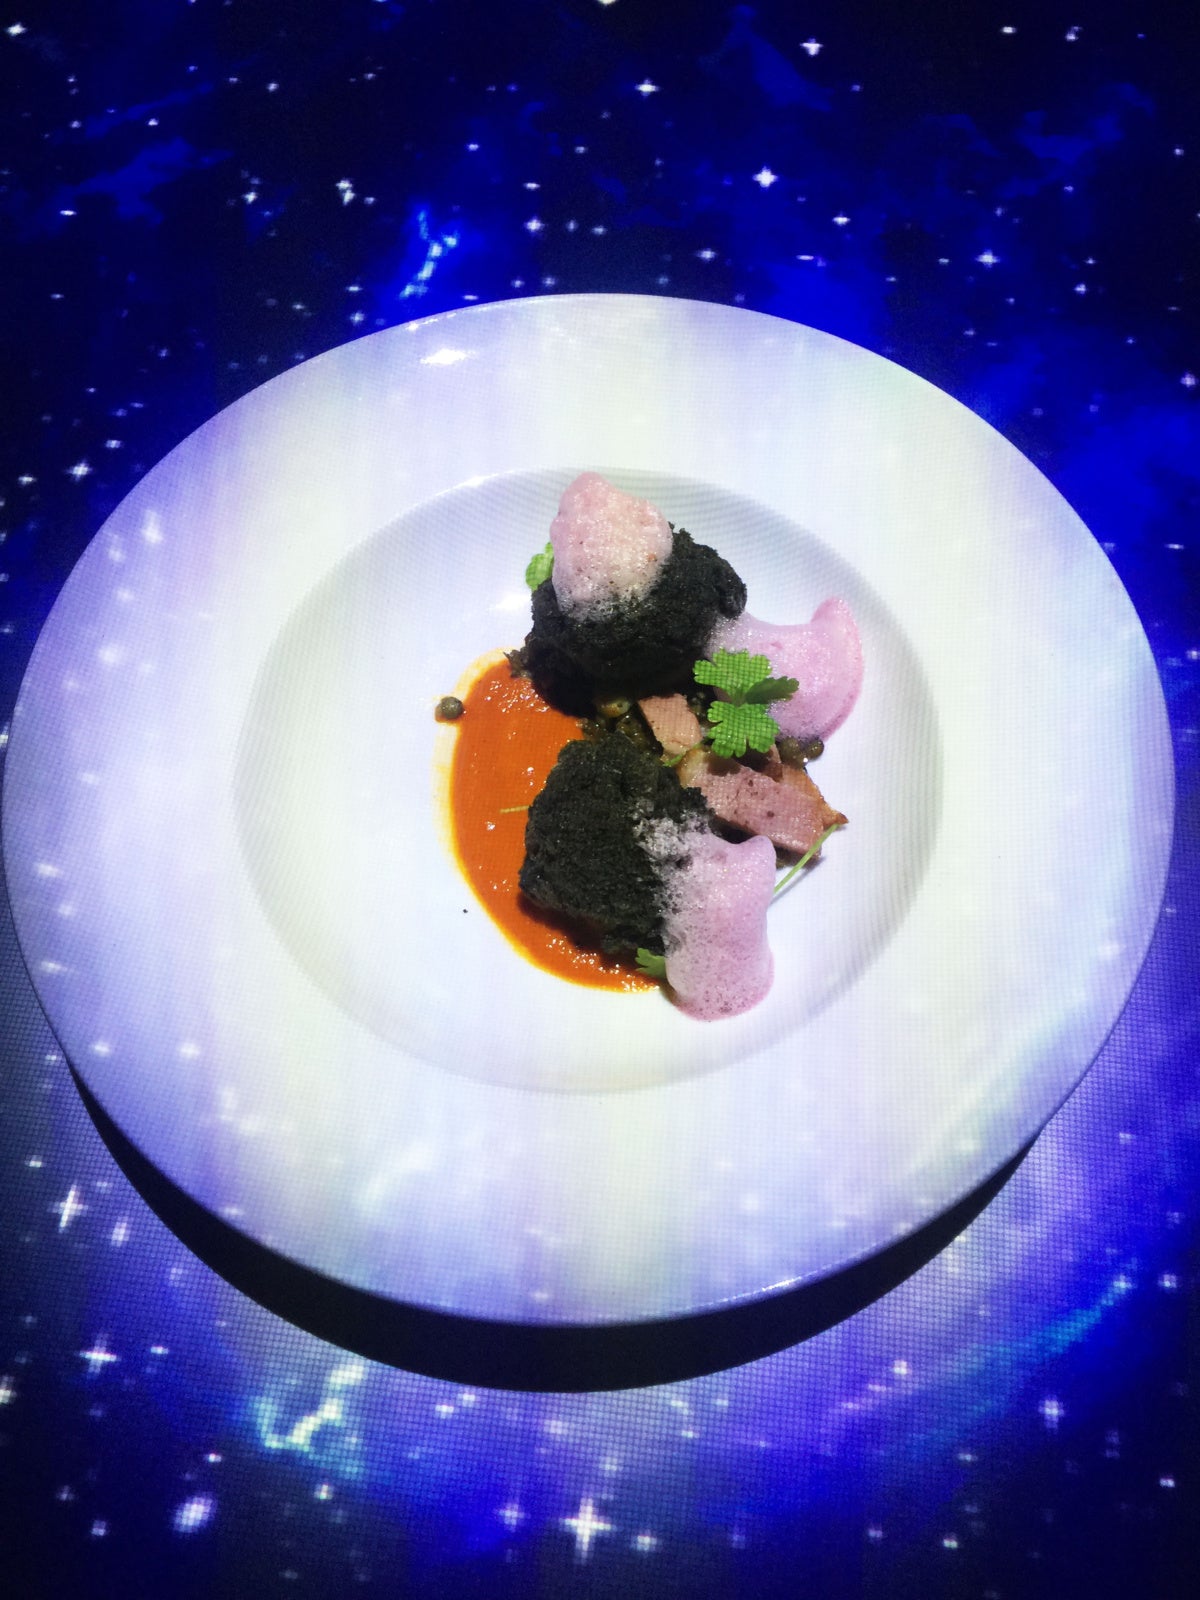 There's a Whimsical & Multi-Sensory Fine Dining Experience in KL & It Starts on 28 April! - WORLD OF BUZZ 8